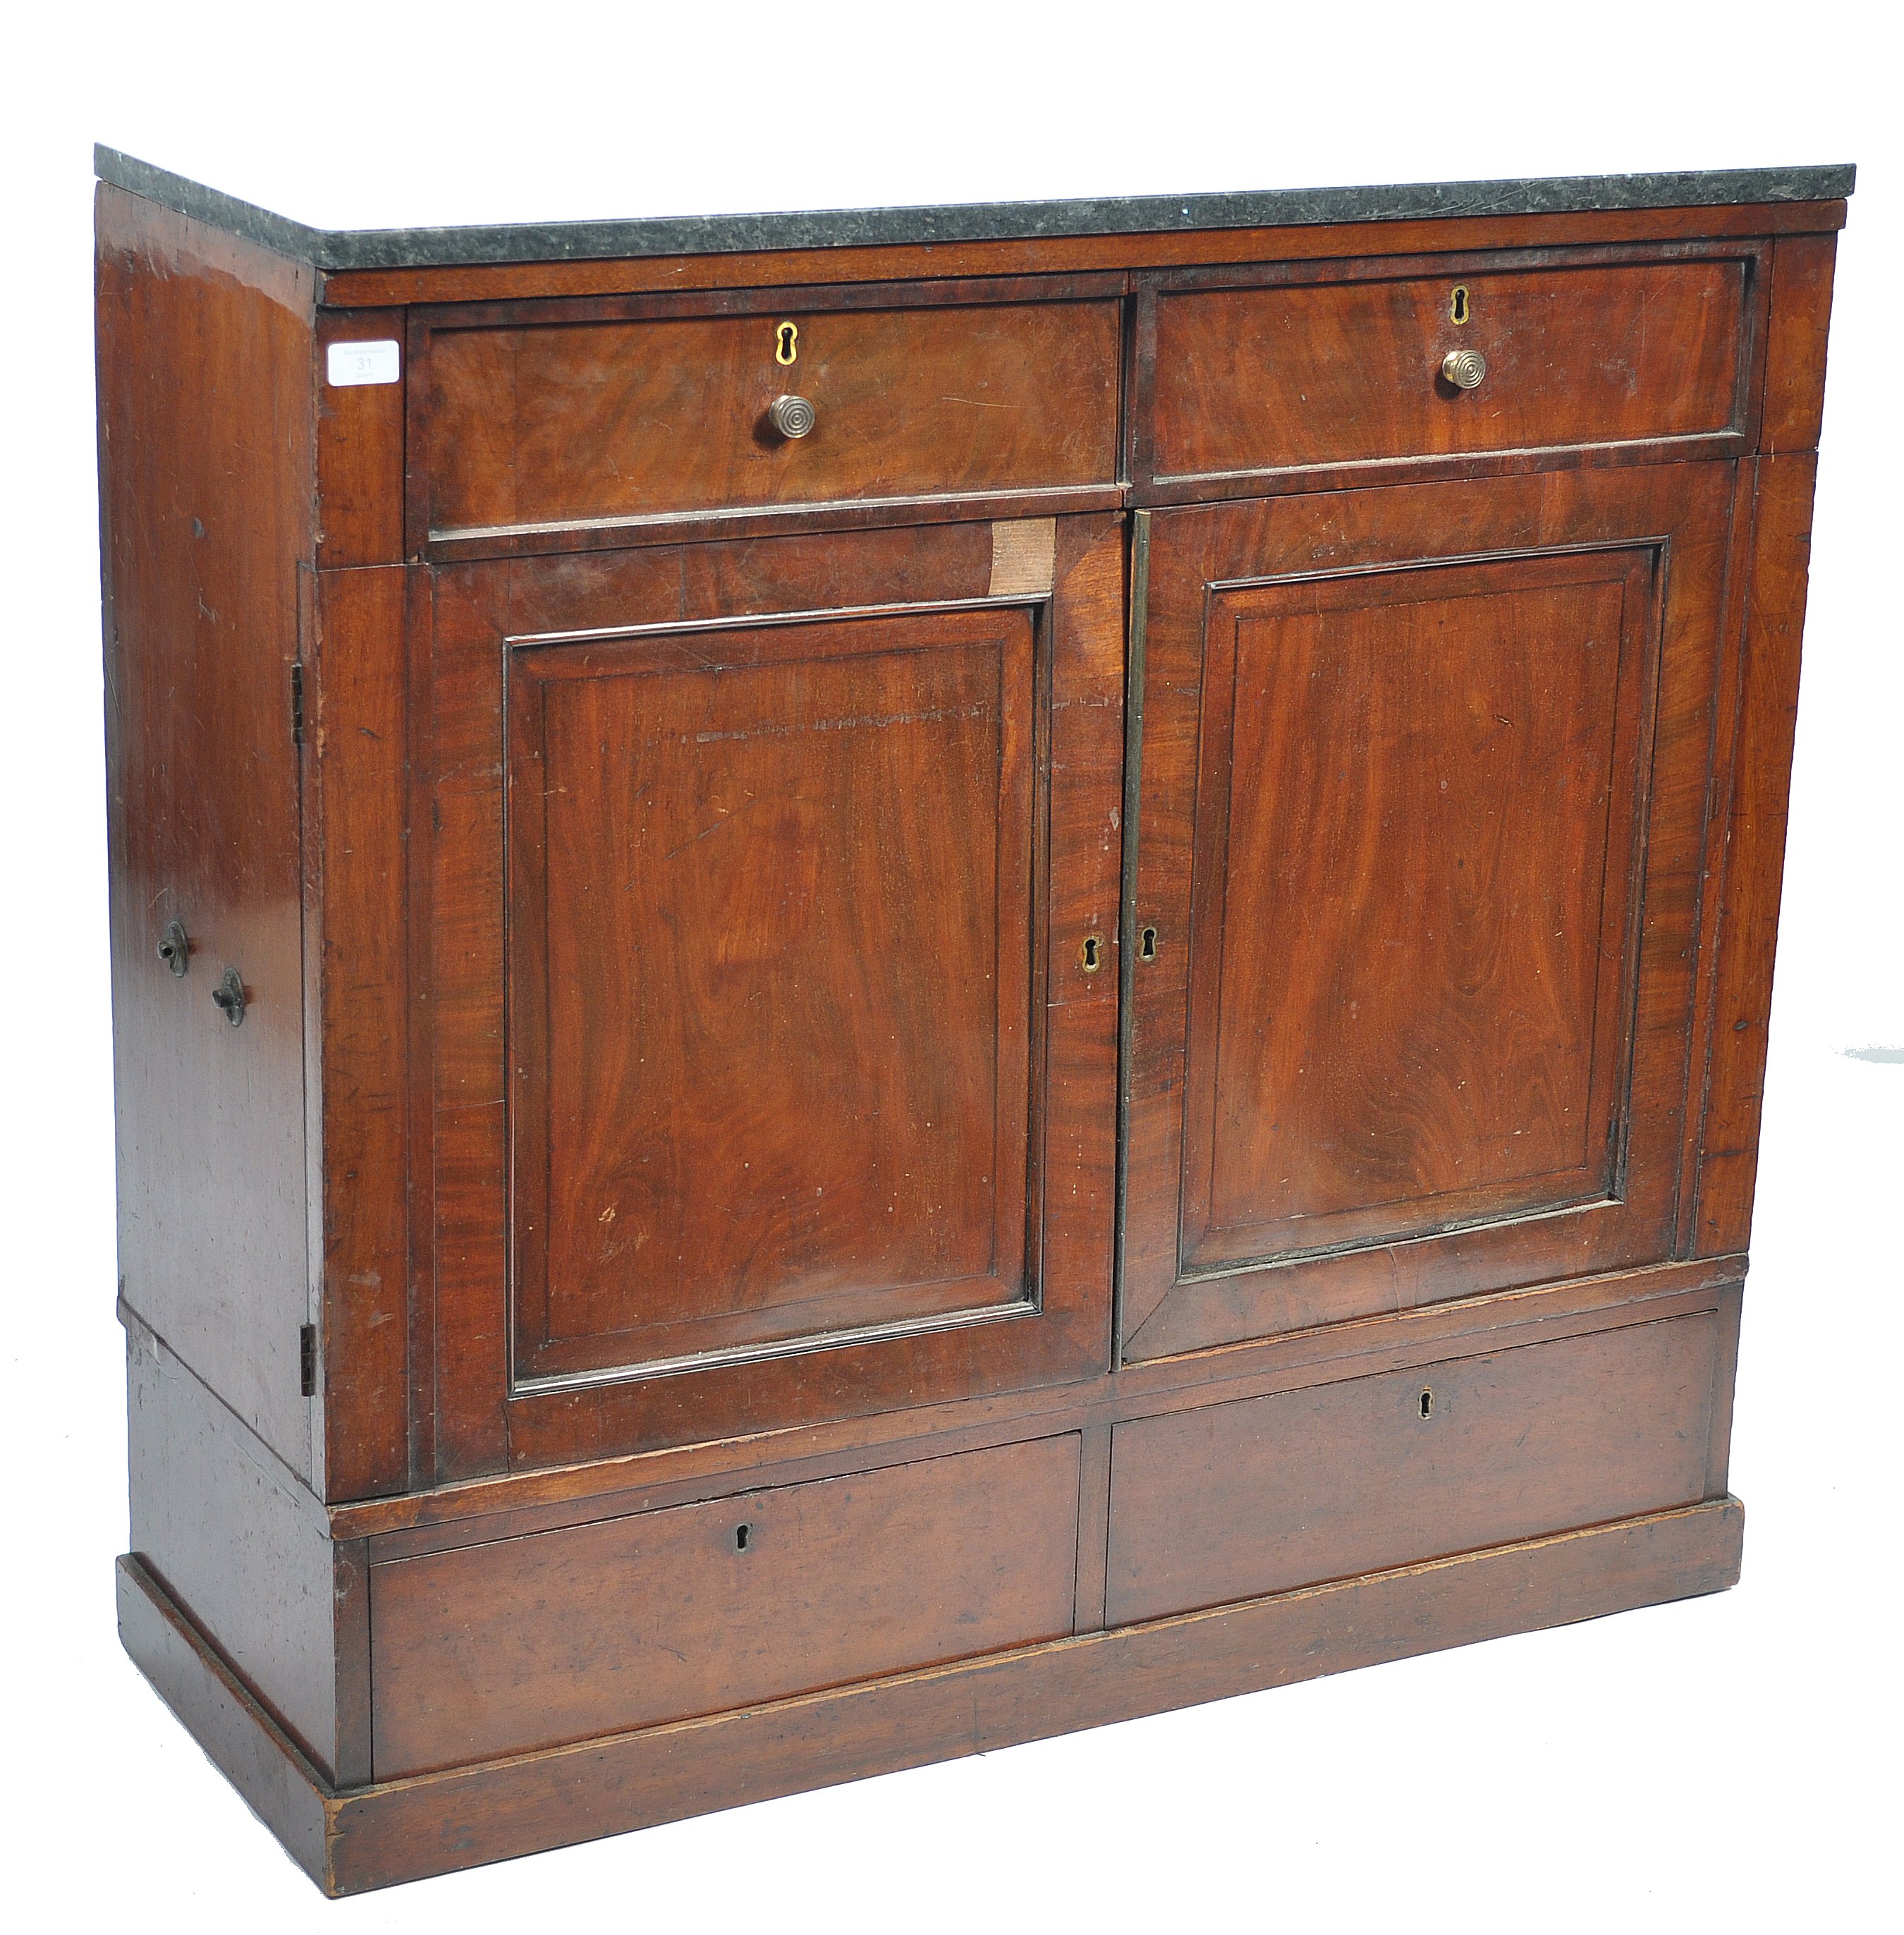 A 19th century Regency mahogany and marble top collectors / specimen cabinet. Raised on a plinth